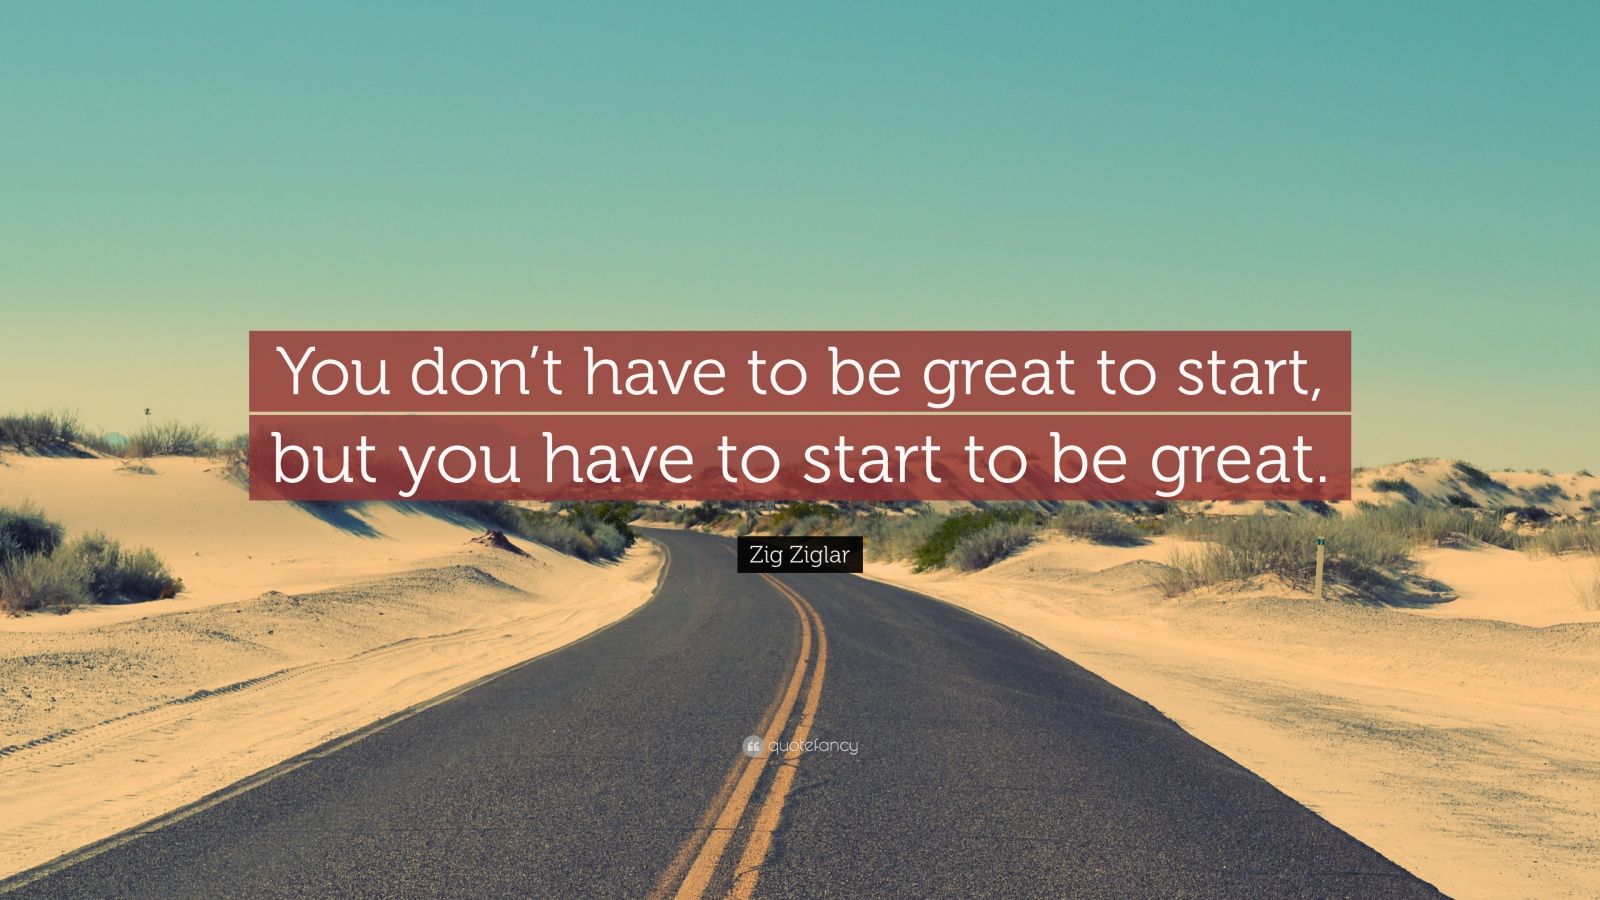 Zig Ziglar Quote: “You don’t have to be great to start, but you have to ...